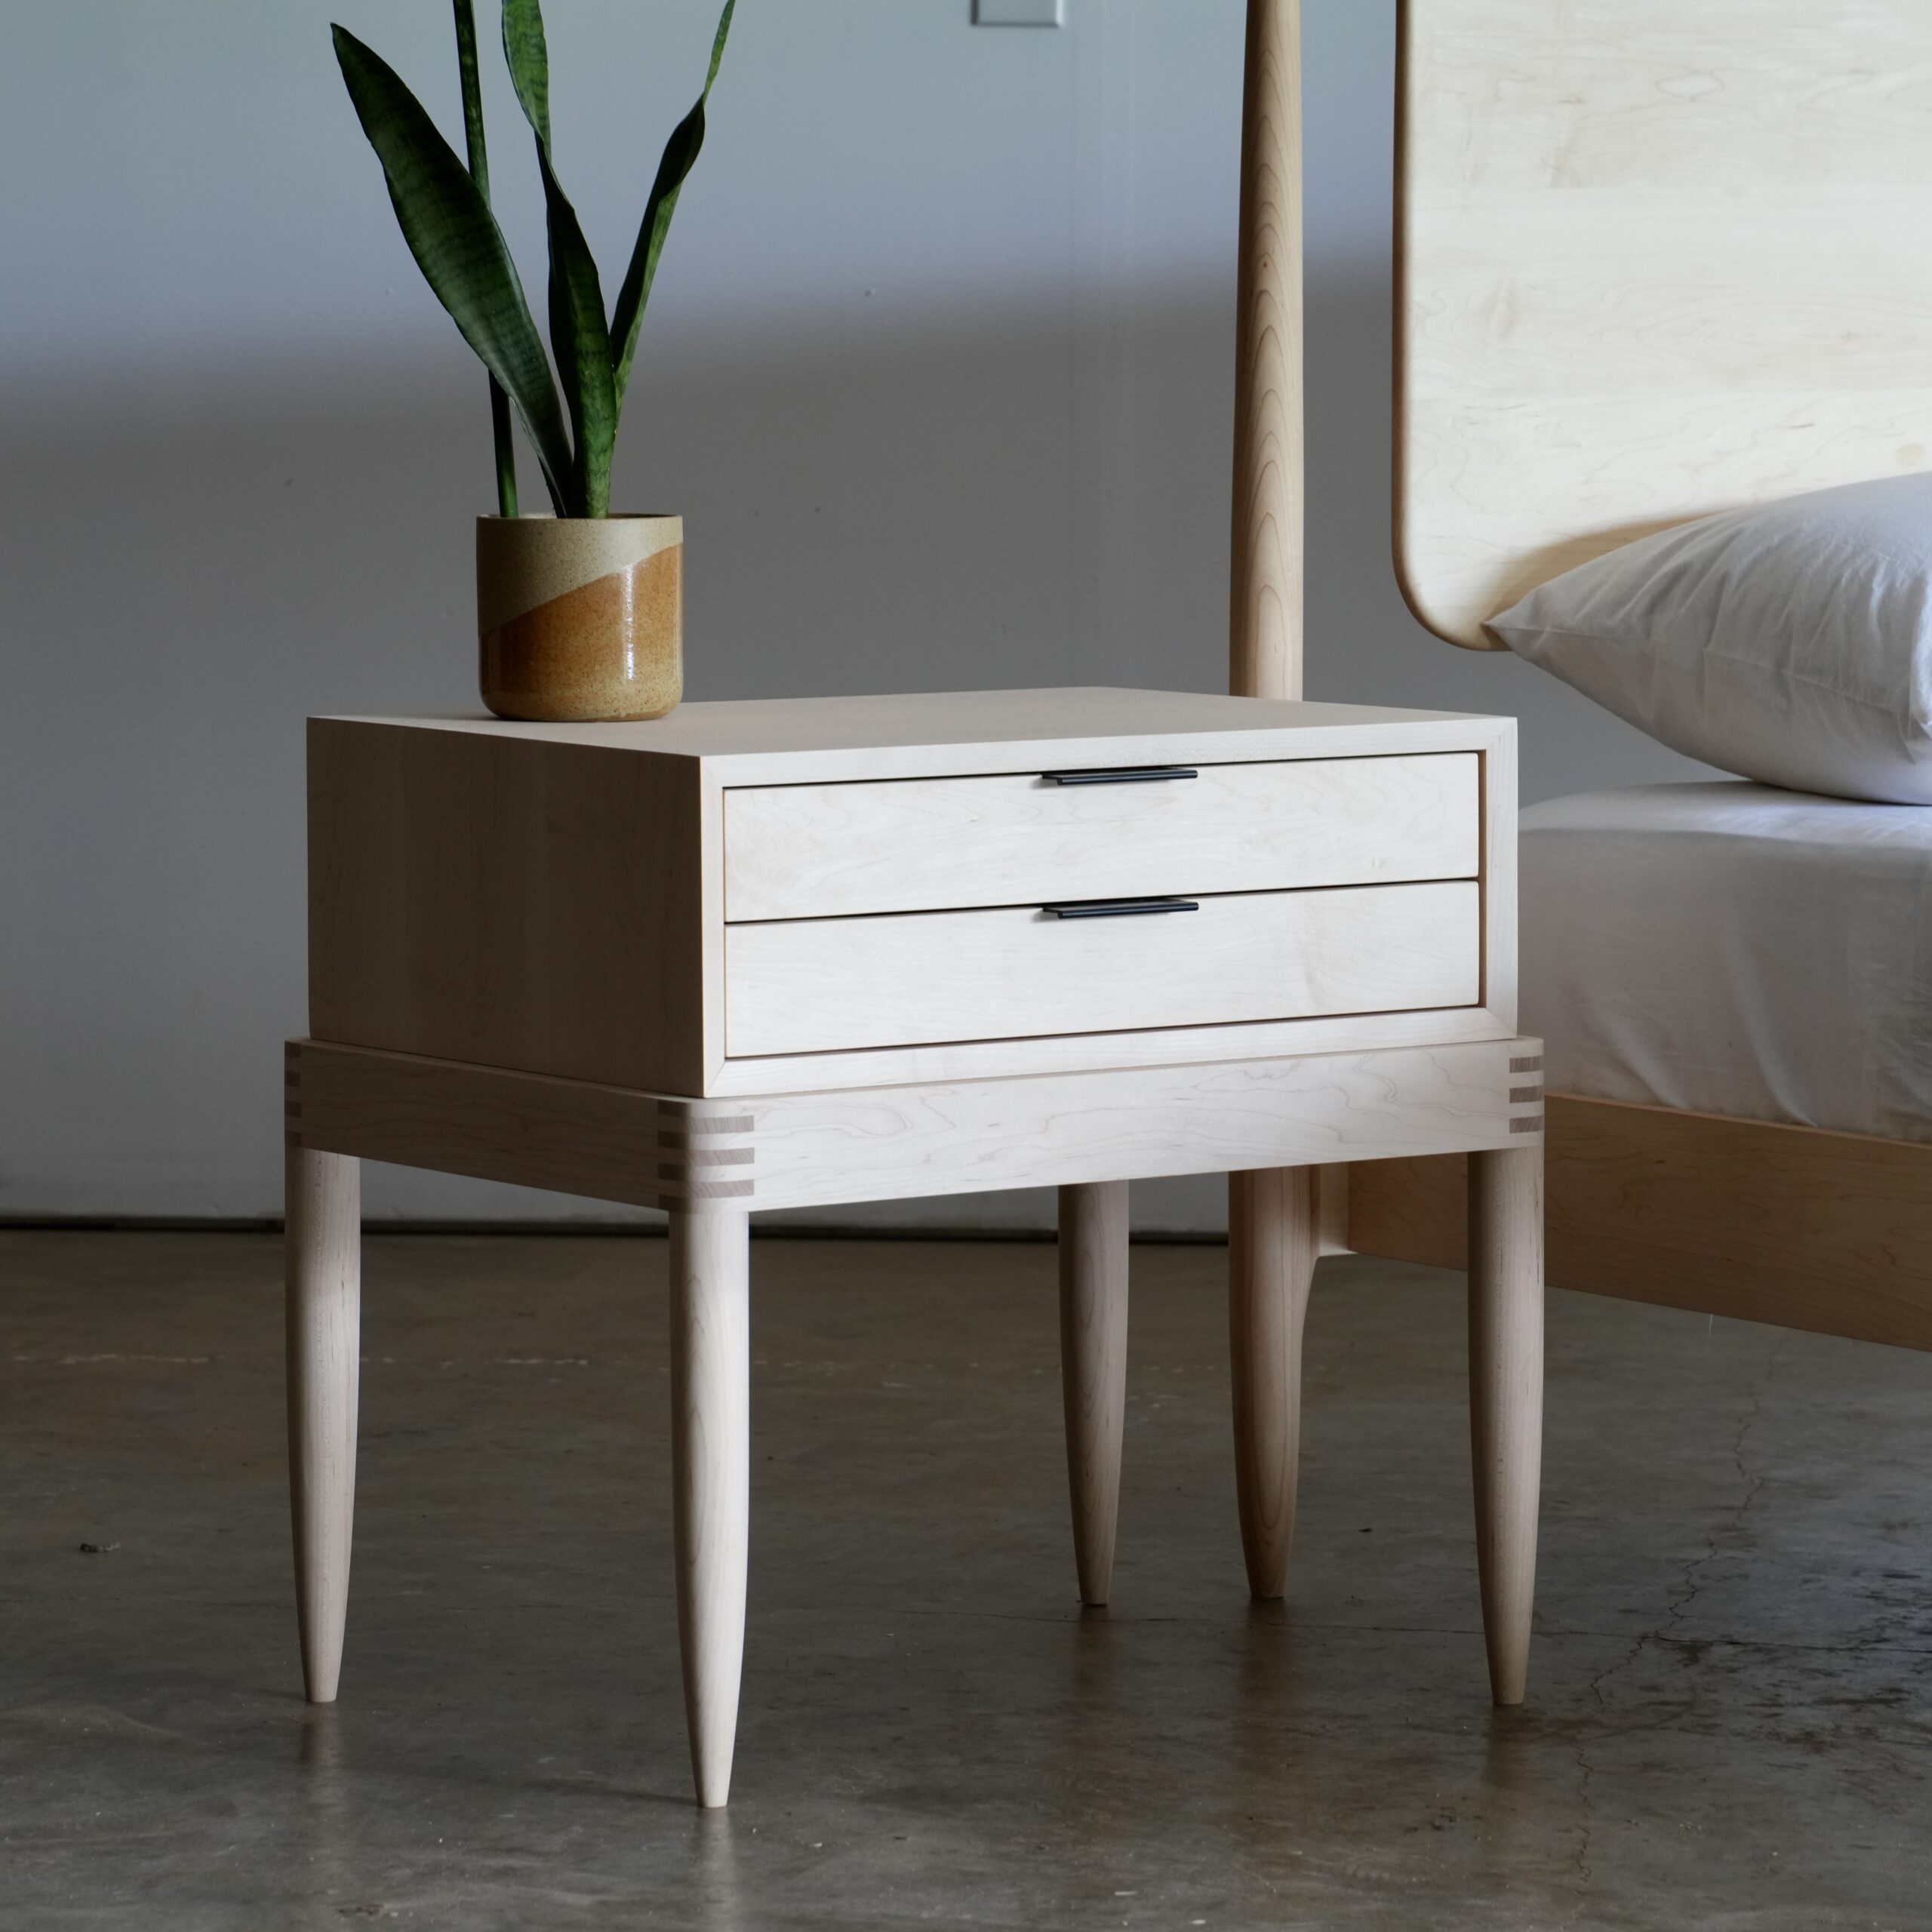 A simple two-drawer solid maple nightstand with exposed joinery at the base and black ledge pulls.